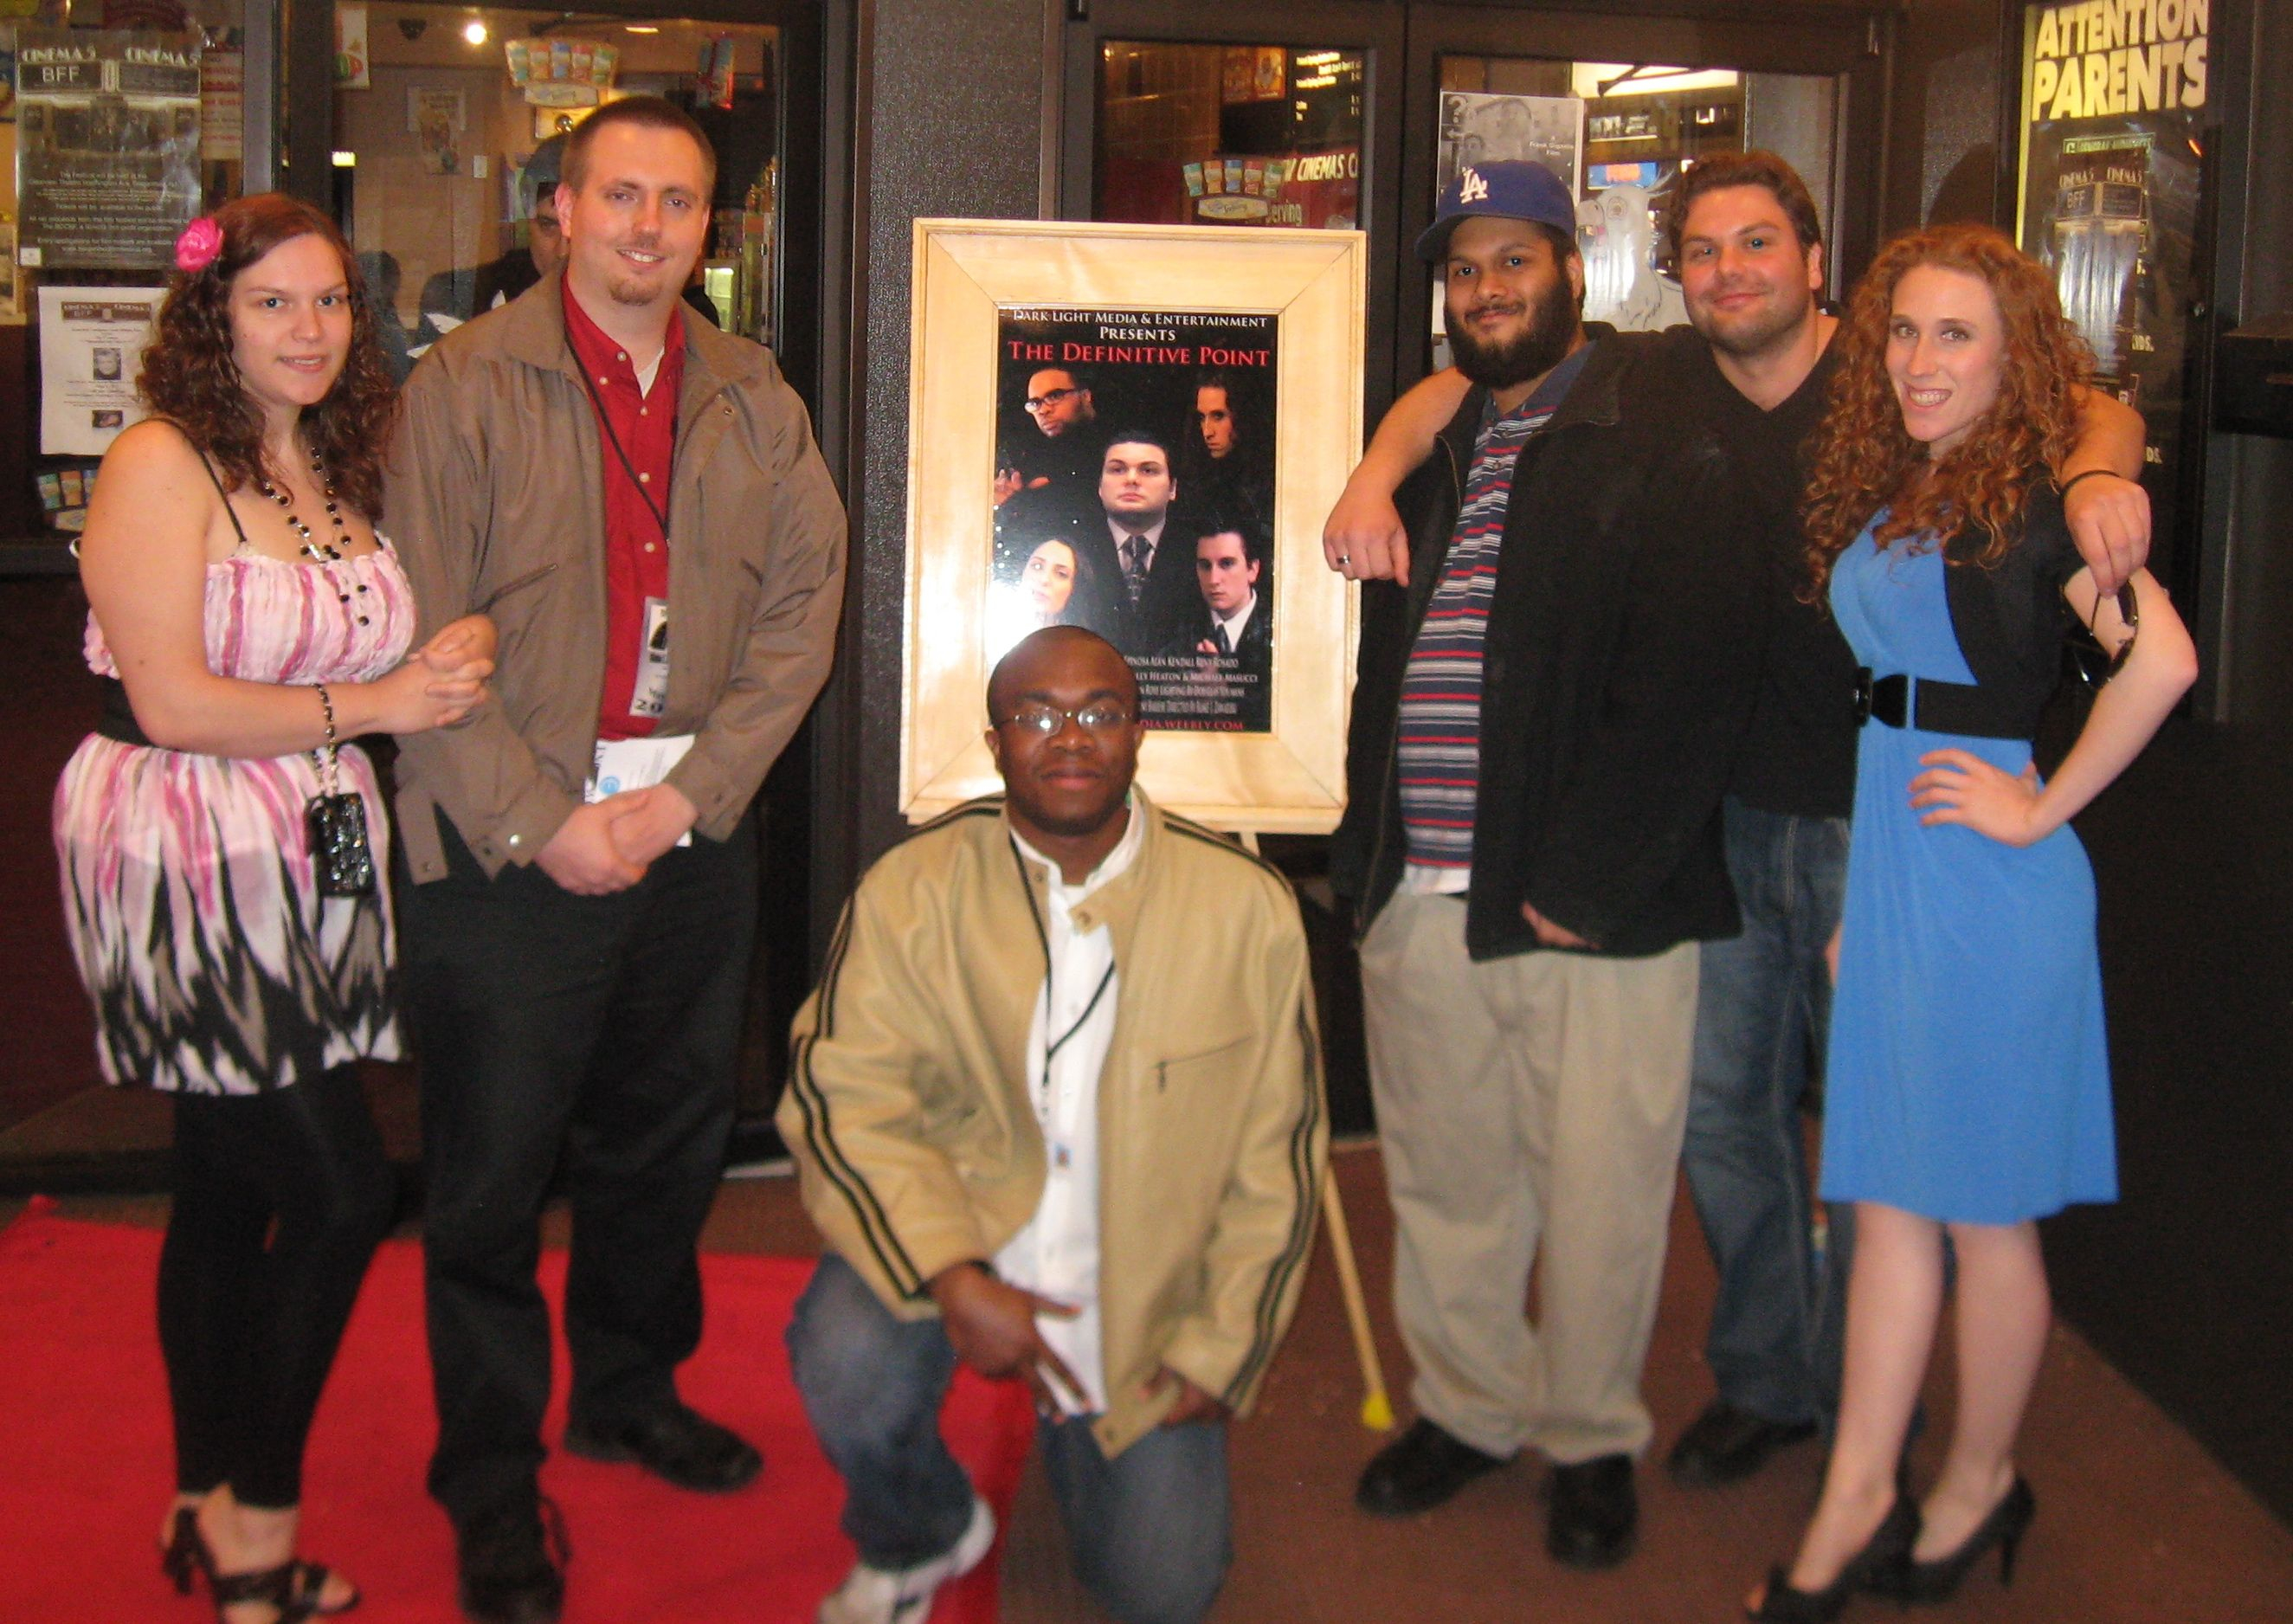 (From Left to Right) Florencia Scuderi, Blake J. Zawadzki, Dayveonne Bussey, Amay Sashital, Dan Gregory, and Katelyn Spinosa at 'The Definitive Point' (2011) premiere at the 2011 Bergenfield Film Festival.